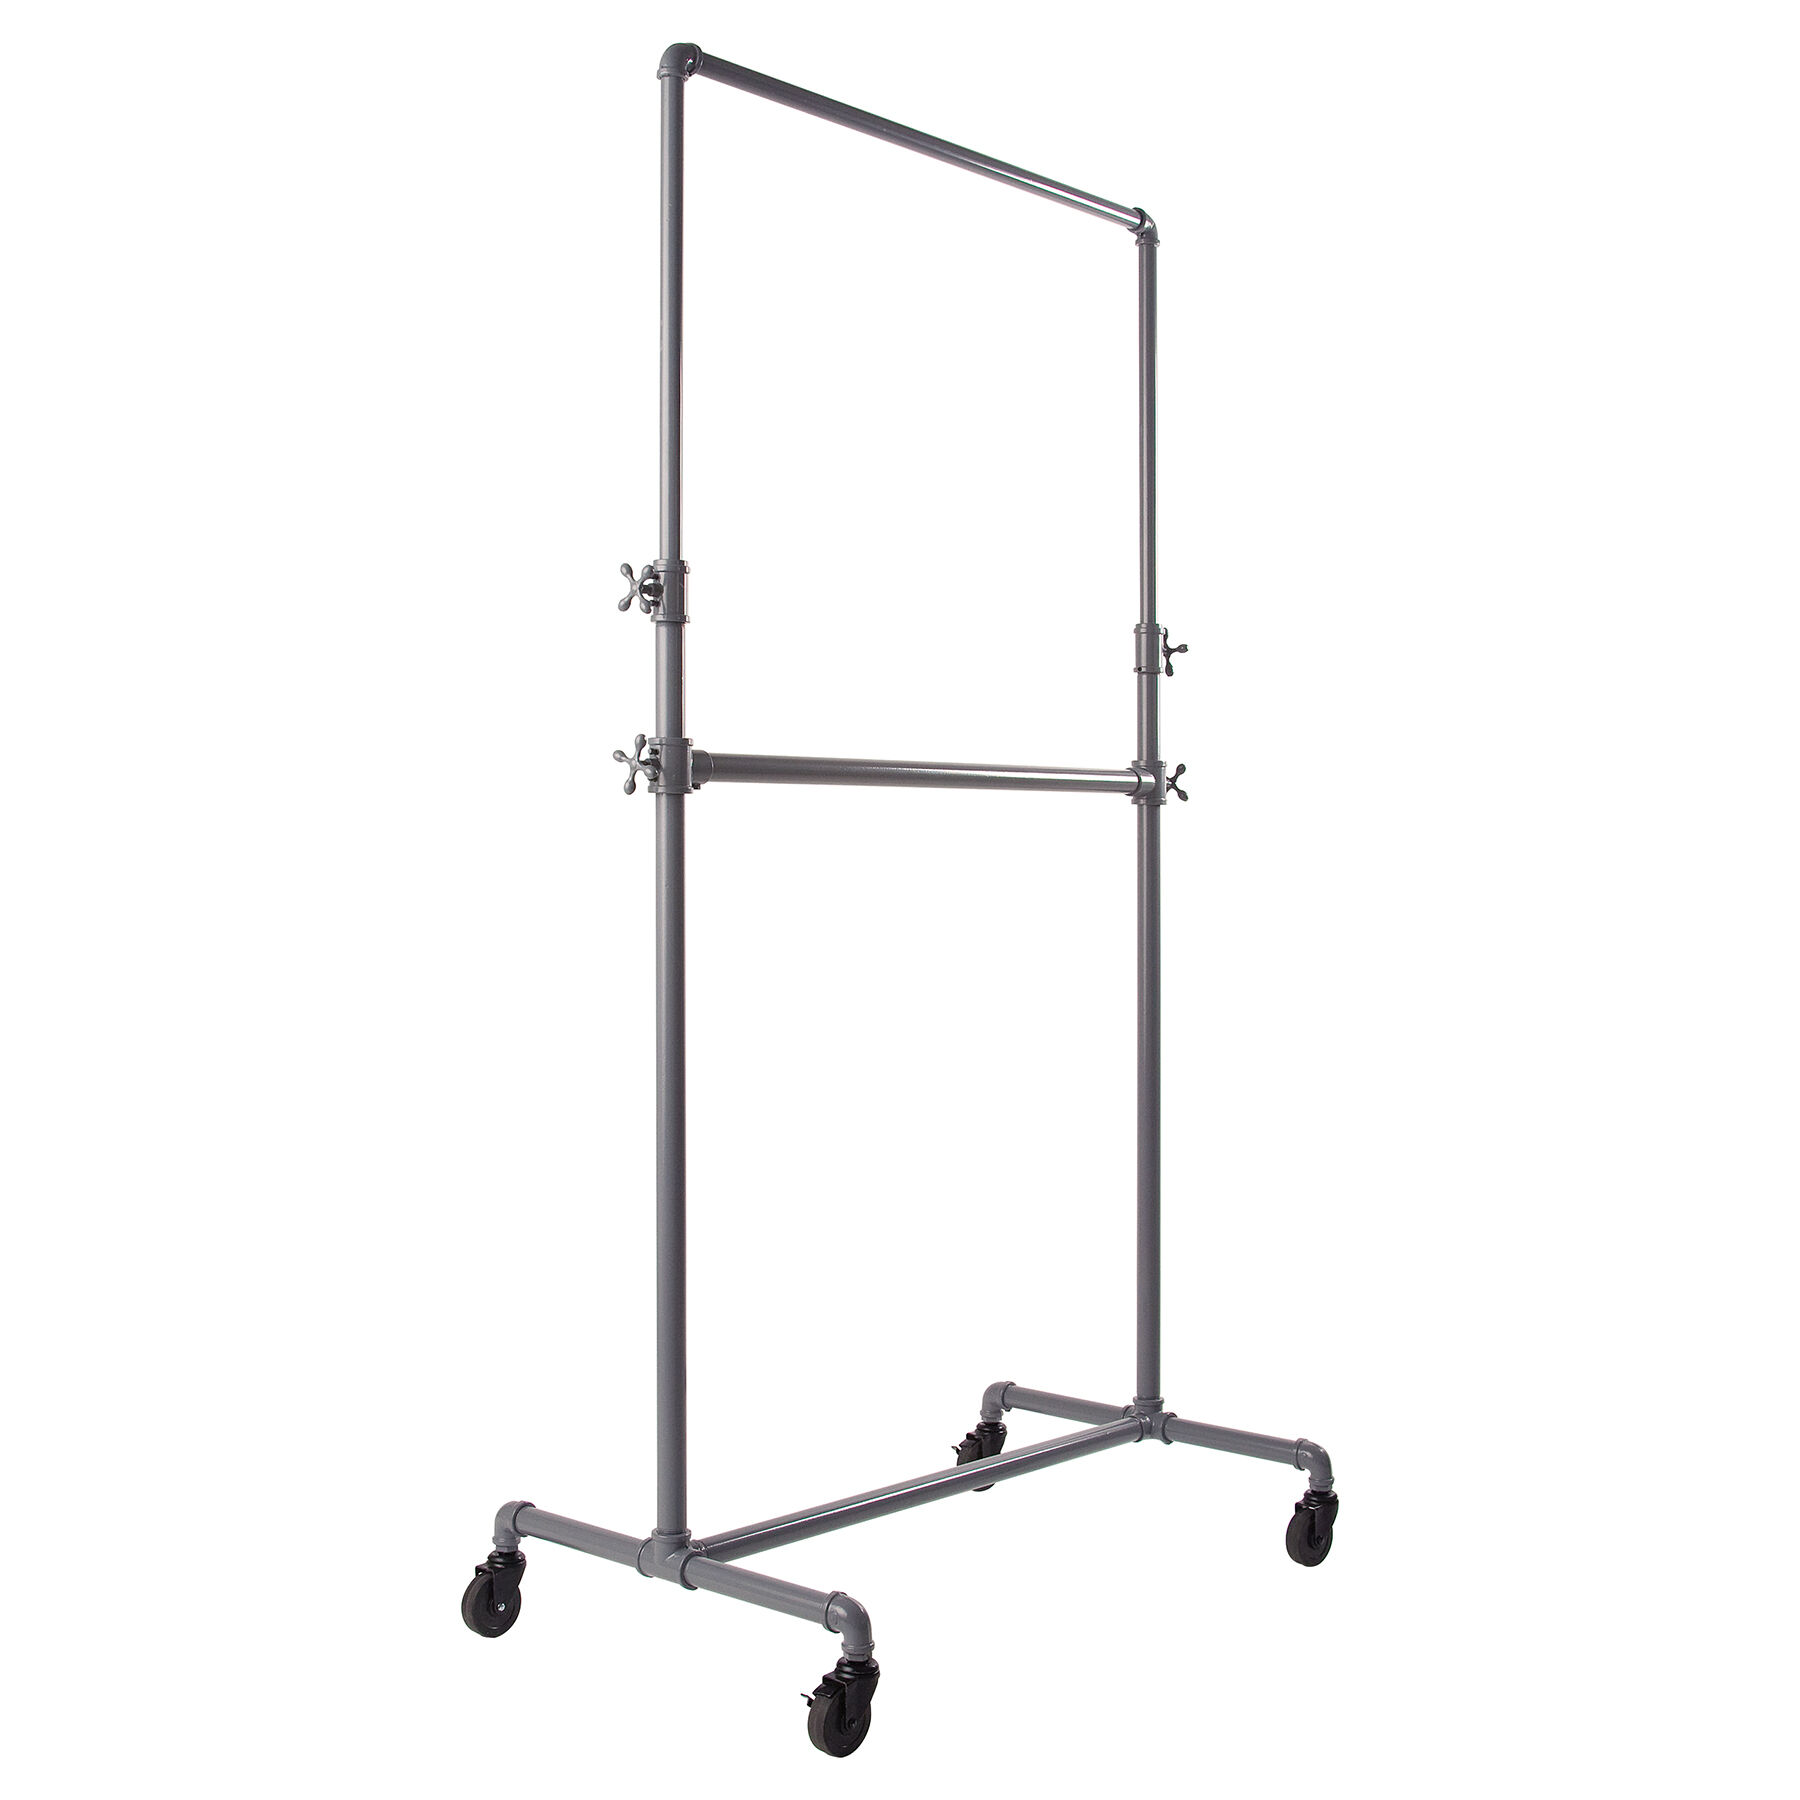 Anthracite Grey  Adjustable Pipe Ballet Bar Rack constructed of heavy duty 1 1/4" diameter plumbing pipe.  Adjusts from 44" - 72" in height. Base: 42-1/2"W x 23-3/8"D. 